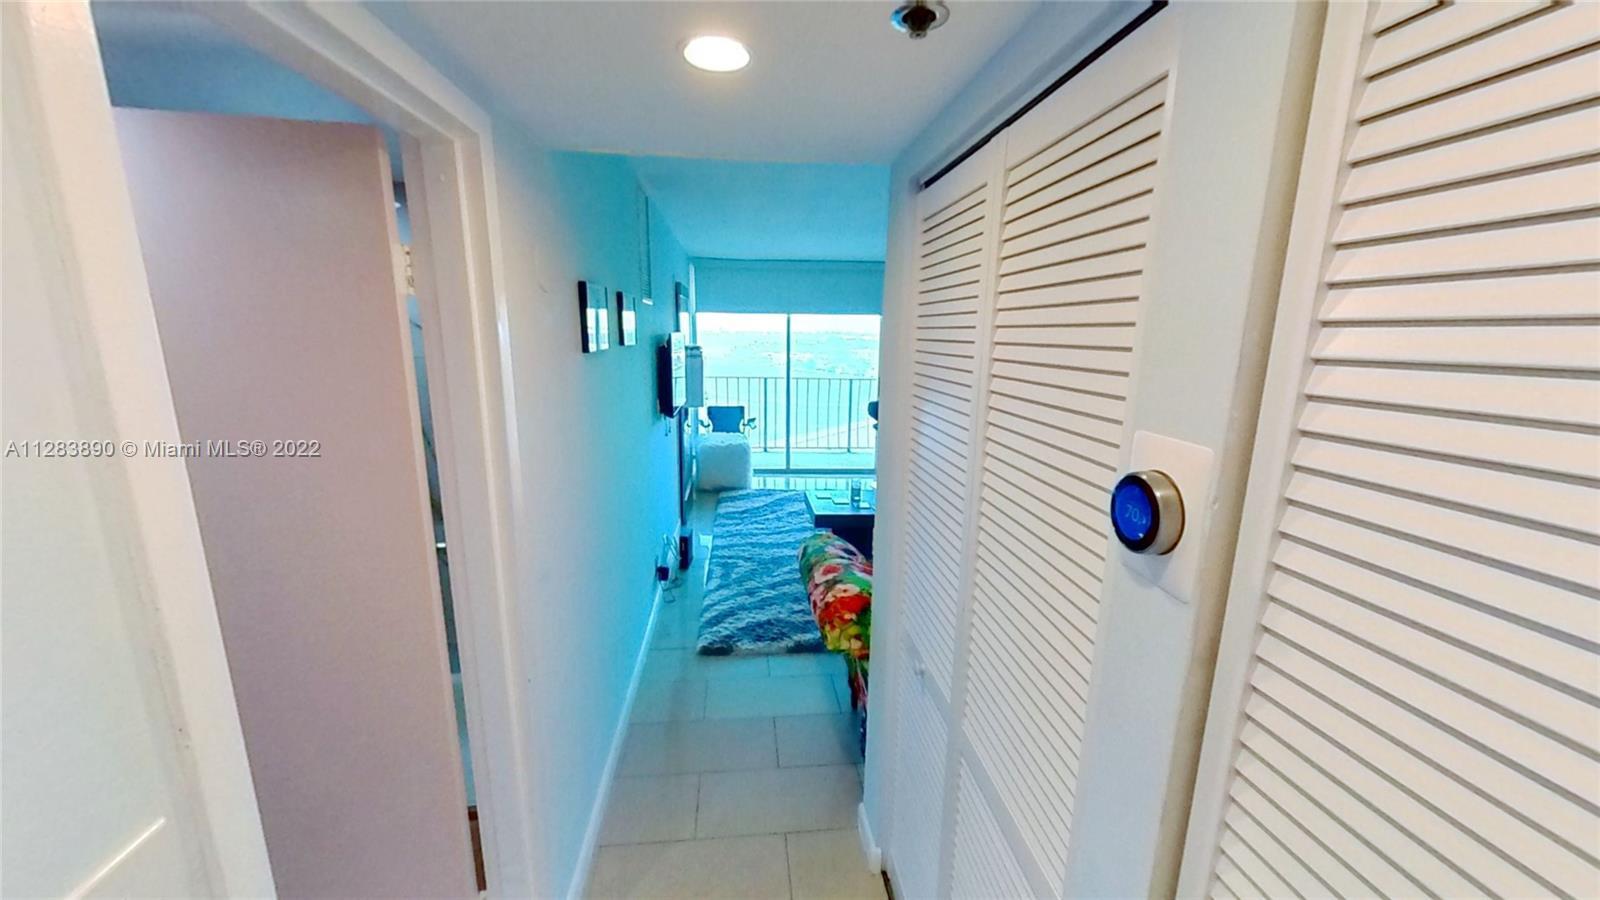 REMODELED APARTMENT WITH A VERY LARGE BALCONY WHERE YOU CAN APPRECIATE A BEAUTIFUL OCEAN VIEW, WITH 